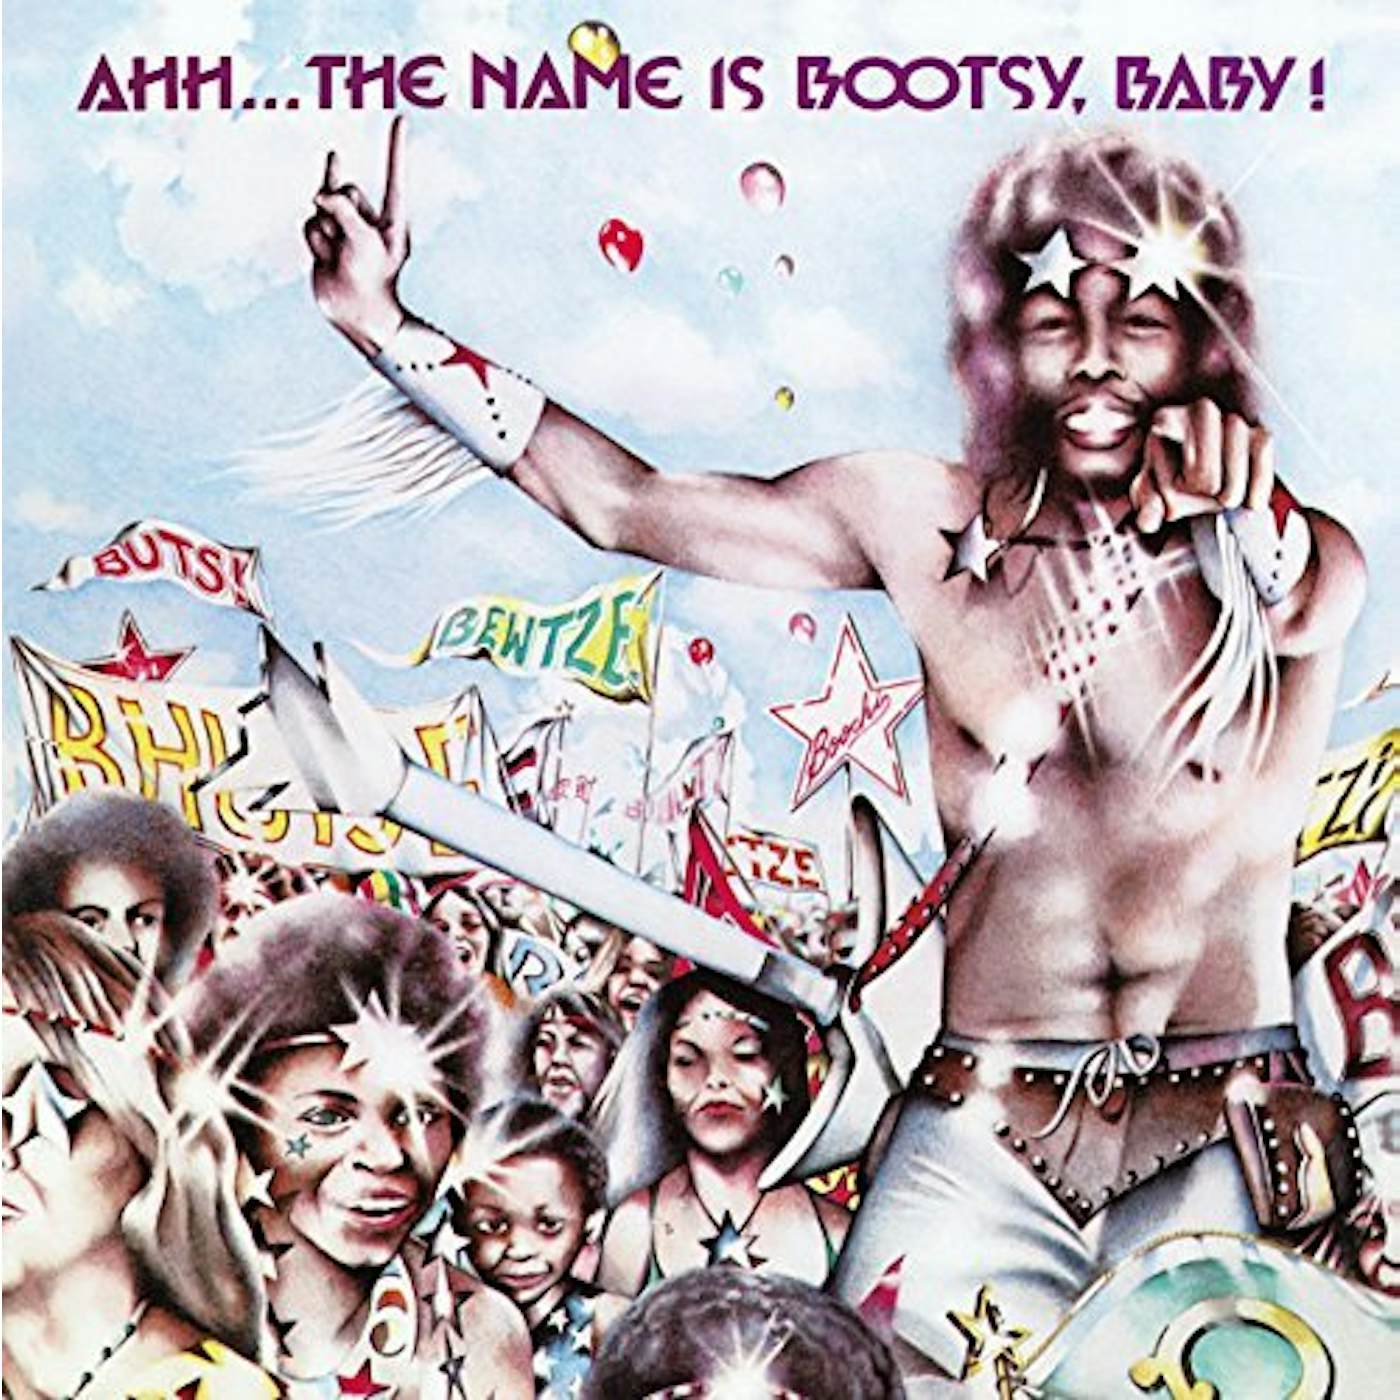 Bootsy's Rubber Band AHH: NAME IS BOOTSY BABY Vinyl Record